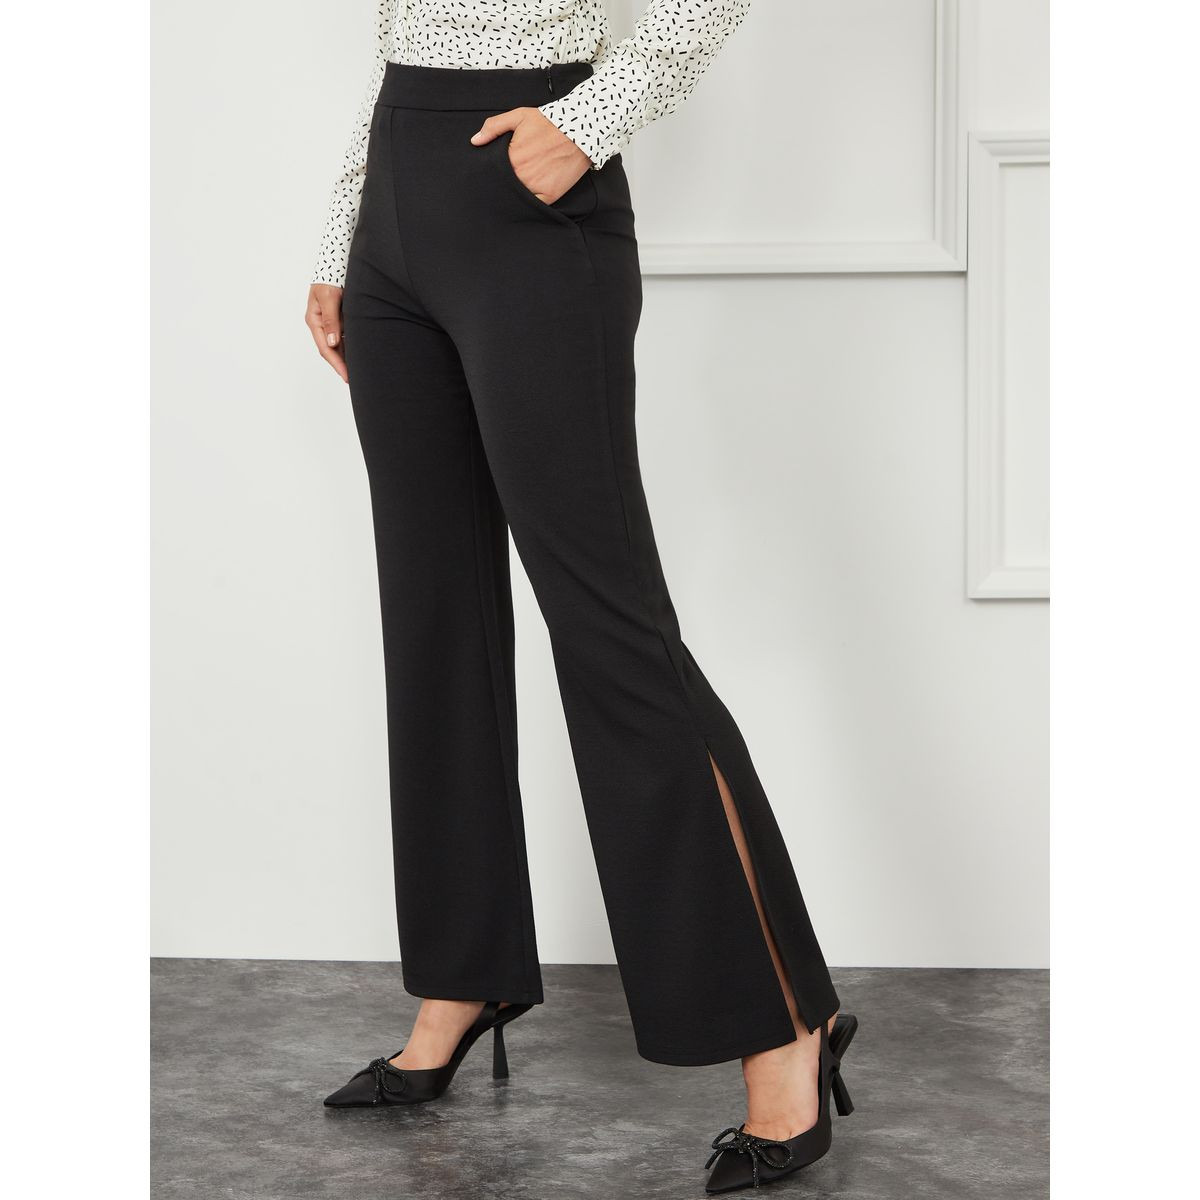 Cynthia Rowley Bonded Fit And Flare Pants in Pink | Lyst